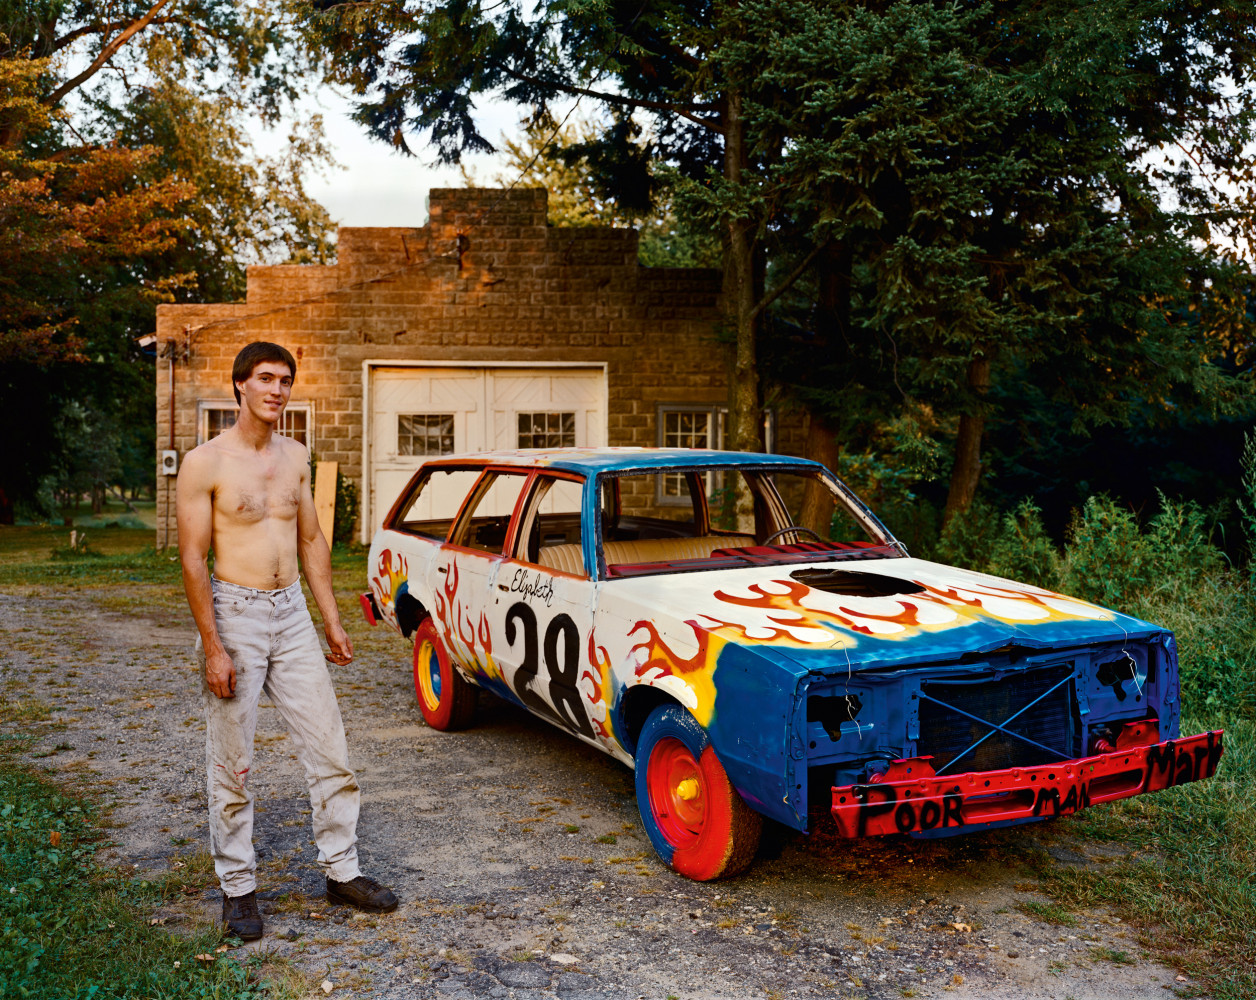 Joel Sternfeld, ‘A Man Waiting for a Tow Truck to Take His Car to a Demolition Derby at the County Fair, South Hadly, Massachusetts, September 1998, the Tow Truck Never Came and He Was Unable to Race That Day’, 1998